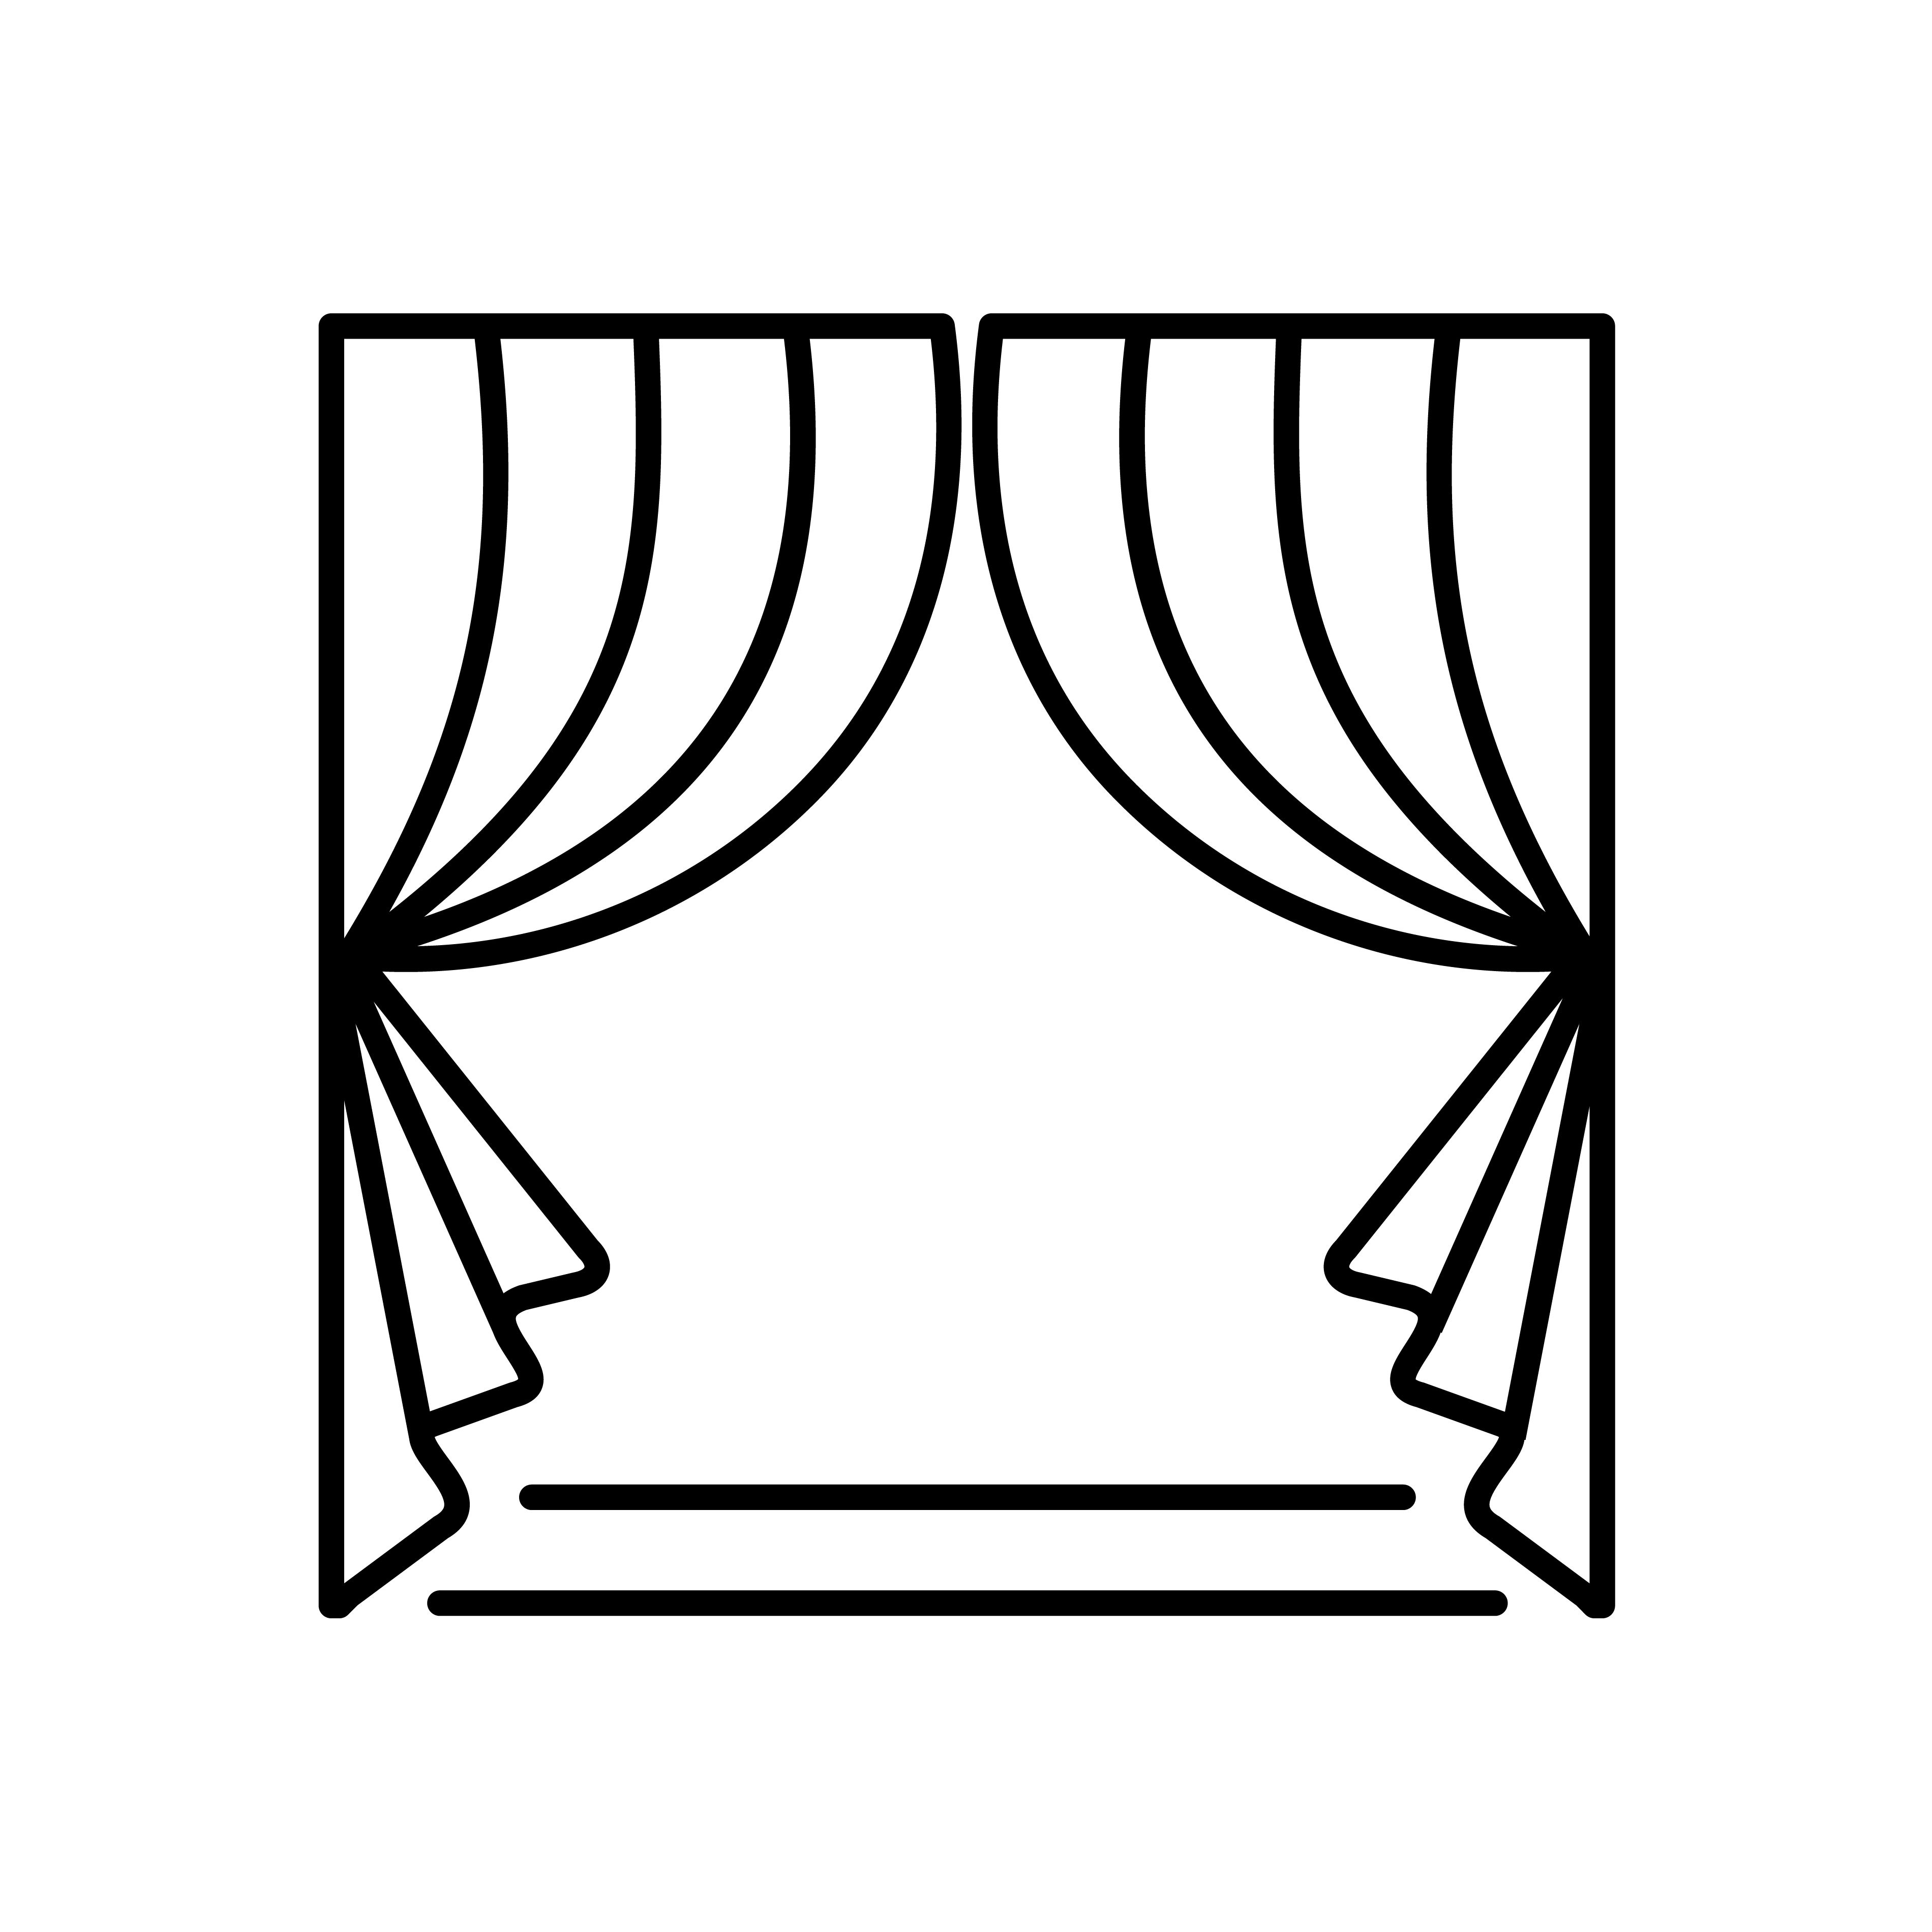 Curtains between 200cm and 300cm long